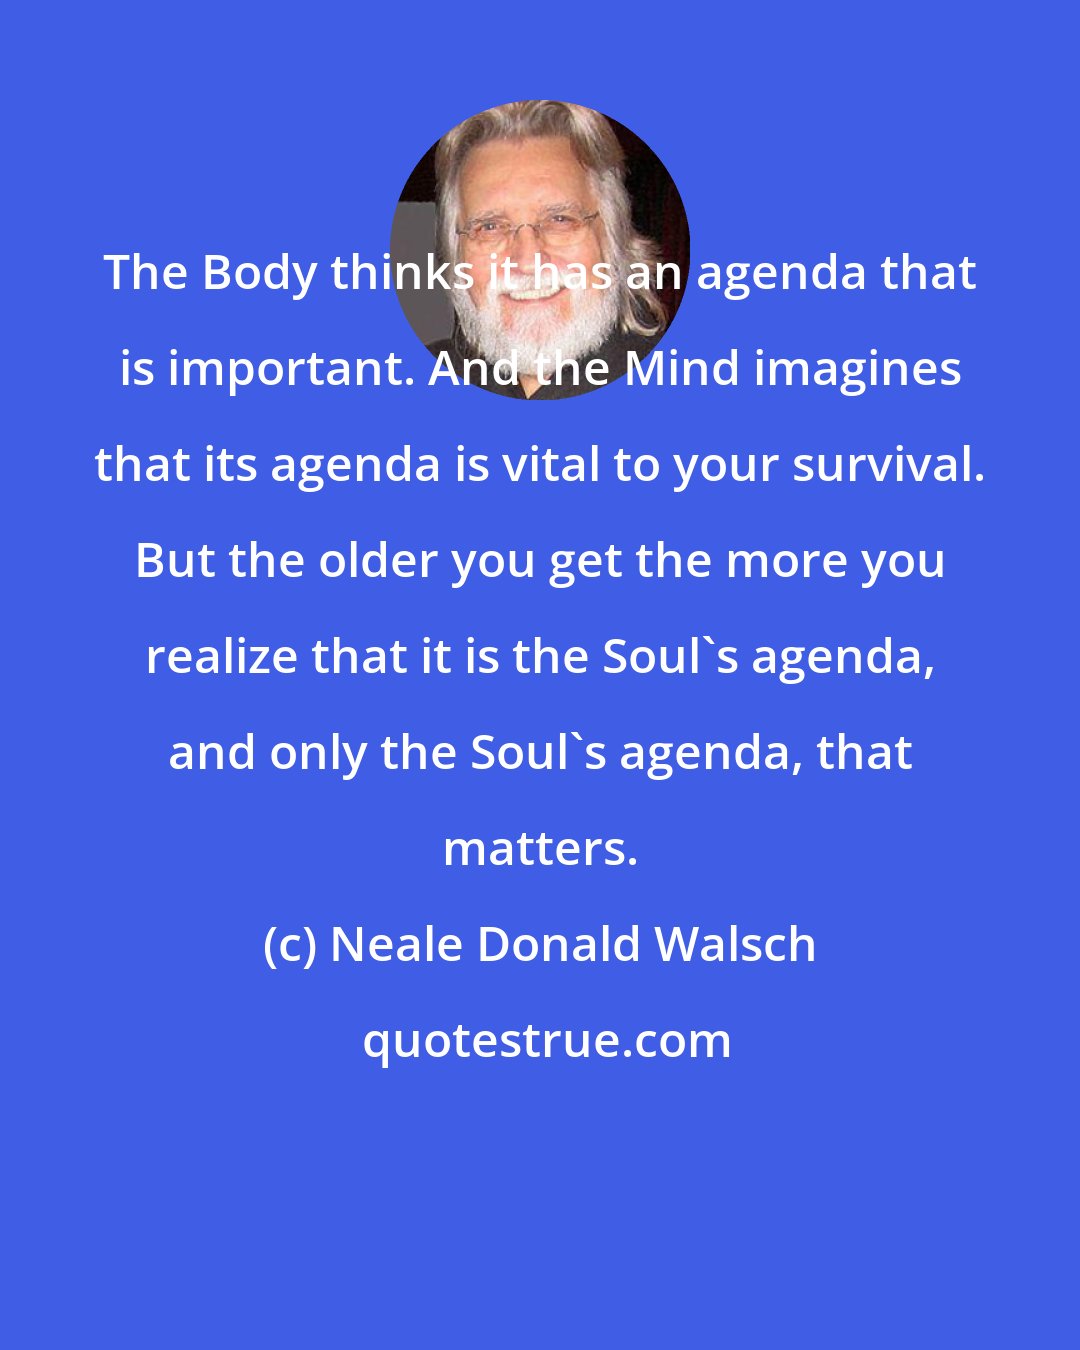 Neale Donald Walsch: The Body thinks it has an agenda that is important. And the Mind imagines that its agenda is vital to your survival. But the older you get the more you realize that it is the Soul's agenda, and only the Soul's agenda, that matters.